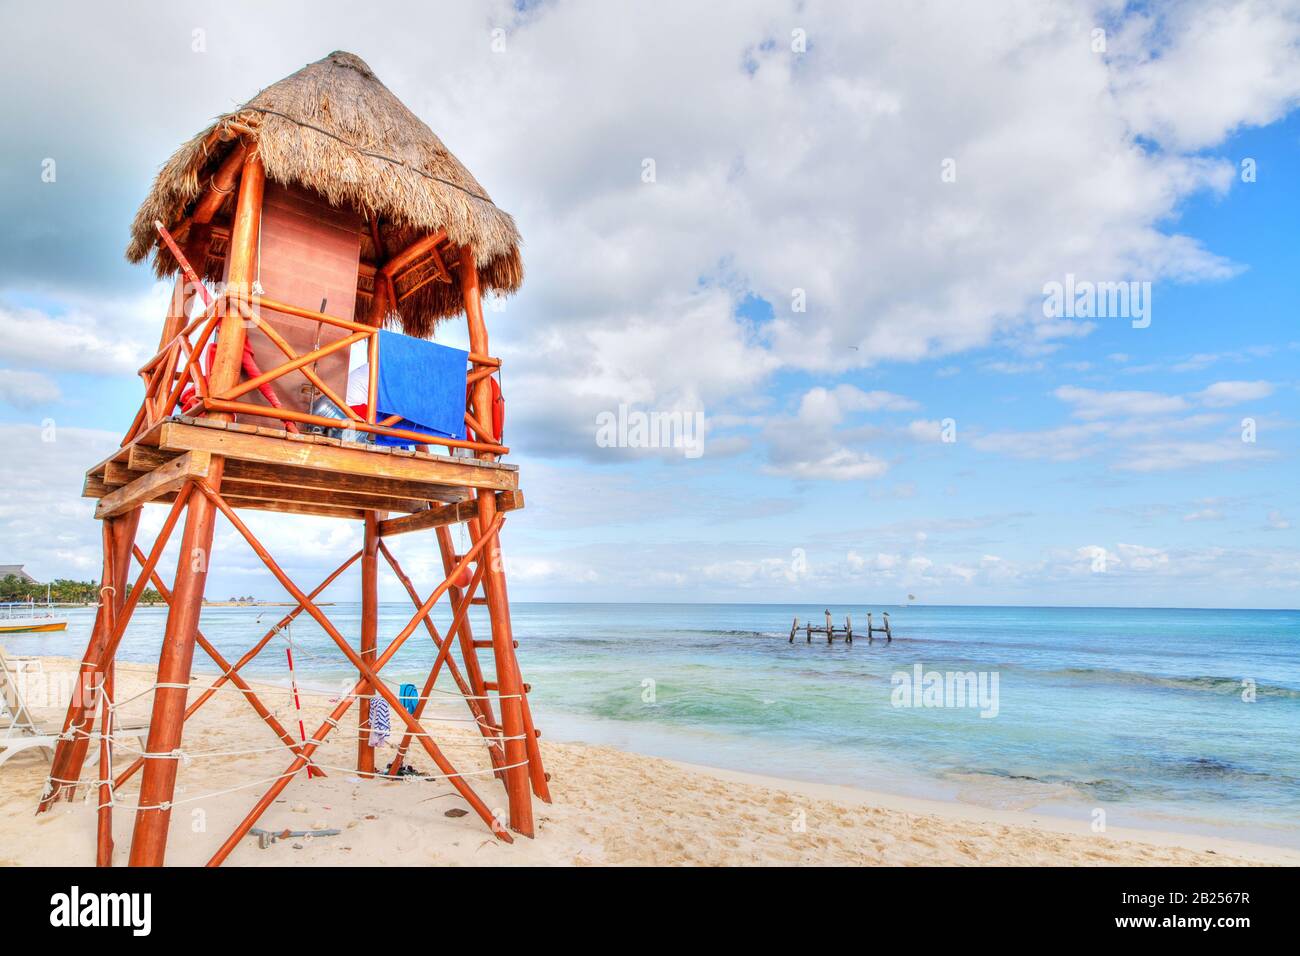 Lifeguard tower on the tropical beaches of Riviera Maya near Cancun, Mexico. Concept of Summer vacation or Winter getaway to the Caribbean Sea. Stock Photo